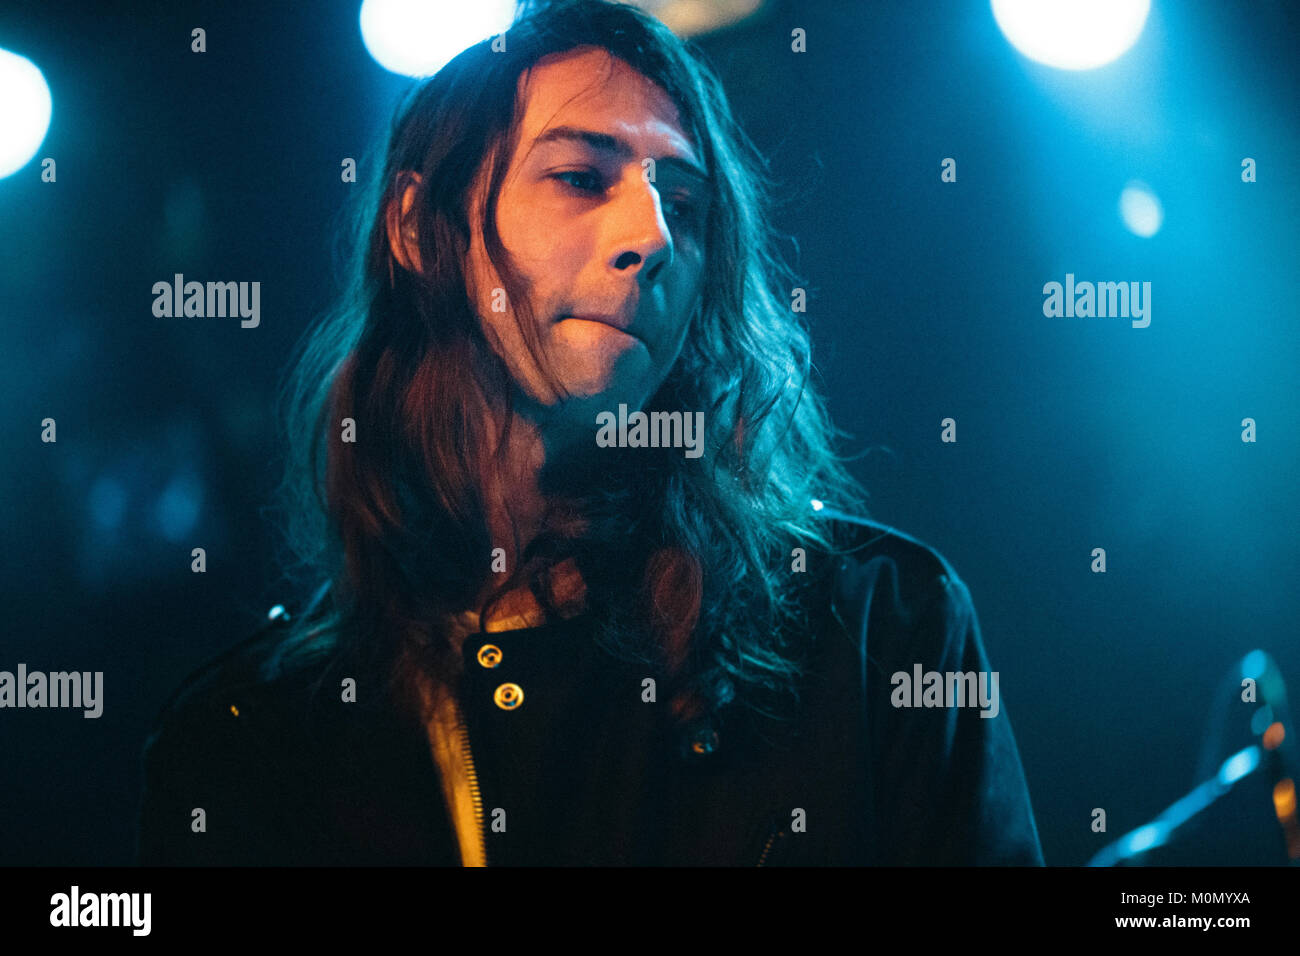 The British singer, songwriter and musician Adam Bainbridge is known by his solo project Kindness and here performs a live concert at Pumpehuset in Copenhagen as part of Frost Festival 2015. Denmark, 11/02 2015. Stock Photo